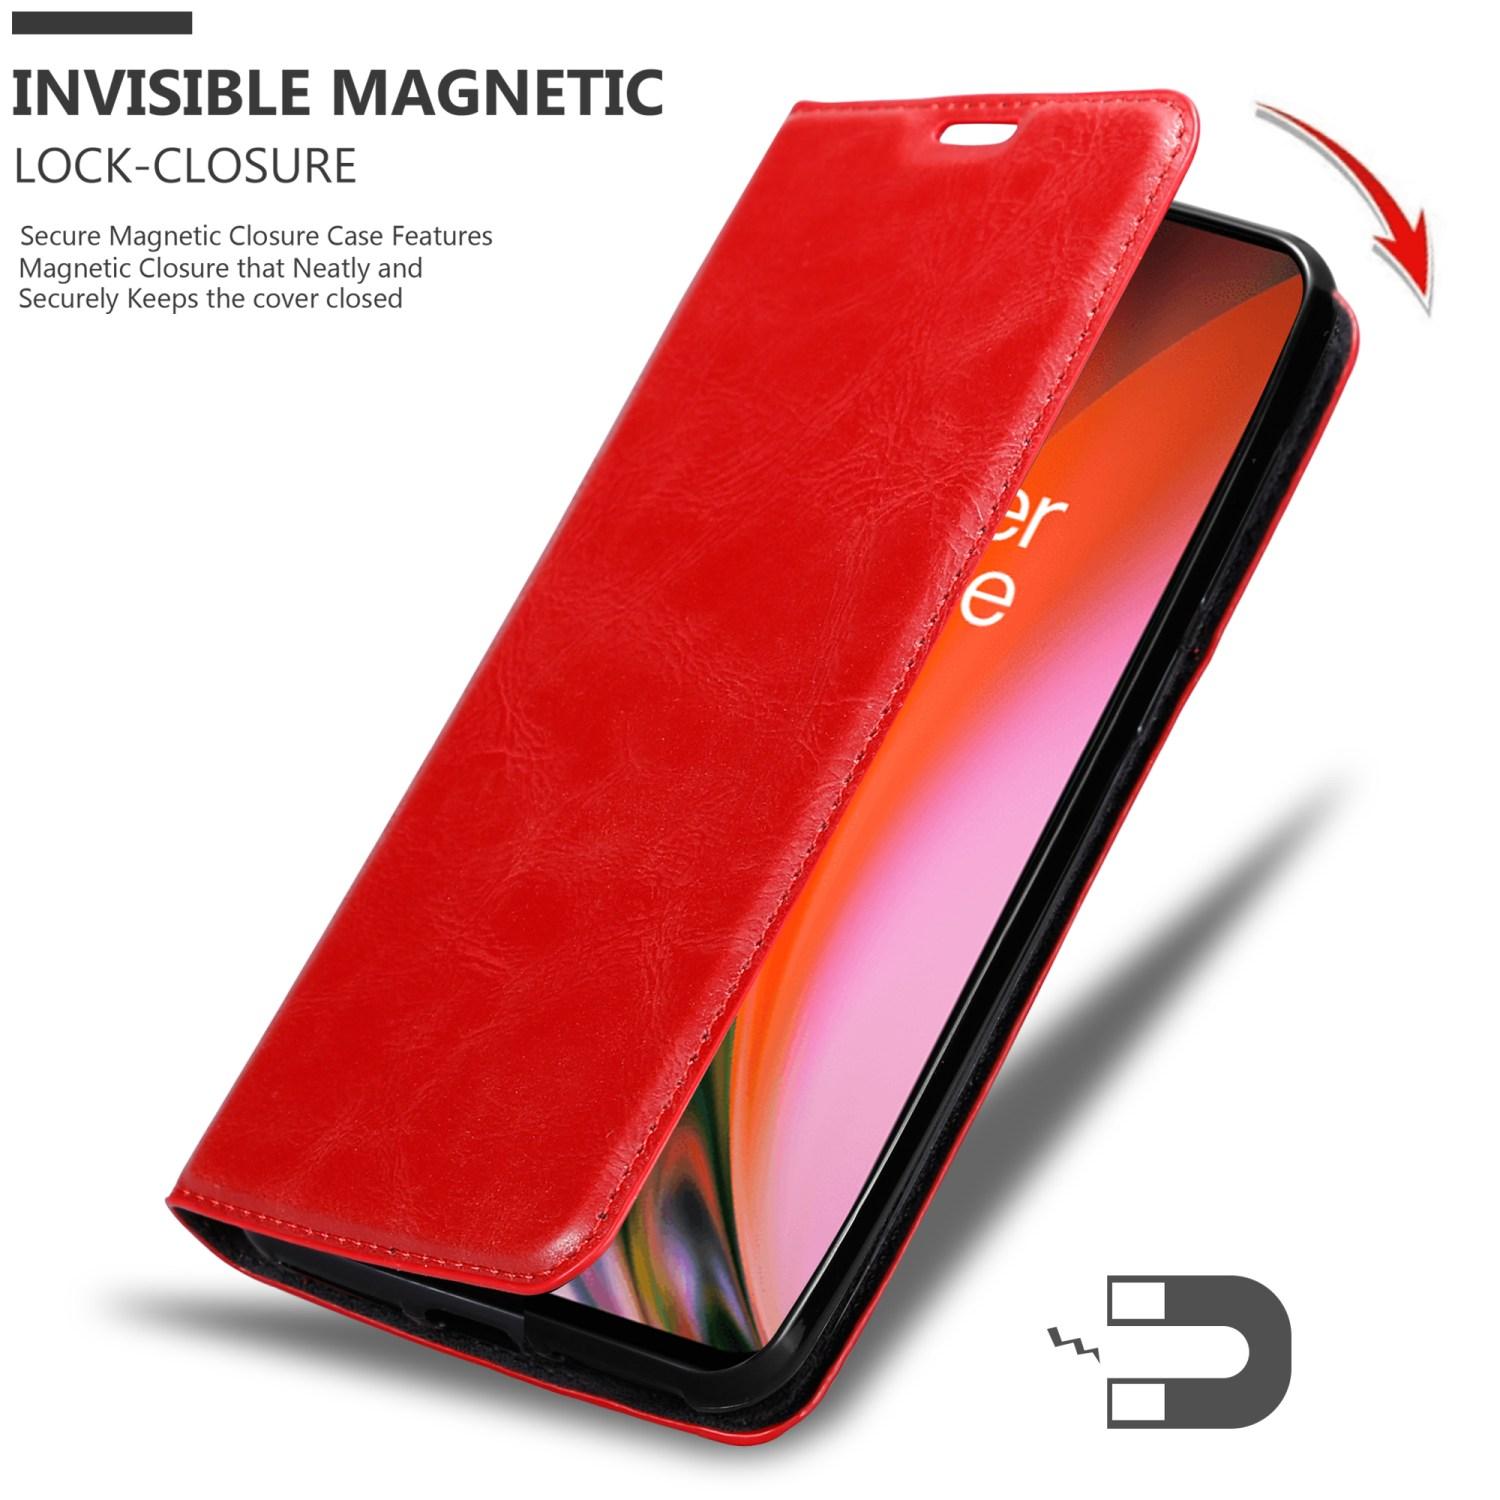 Invisible ROT CADORABO OnePlus, Hülle Magnet, APFEL 5G, Bookcover, Book 2 Nord